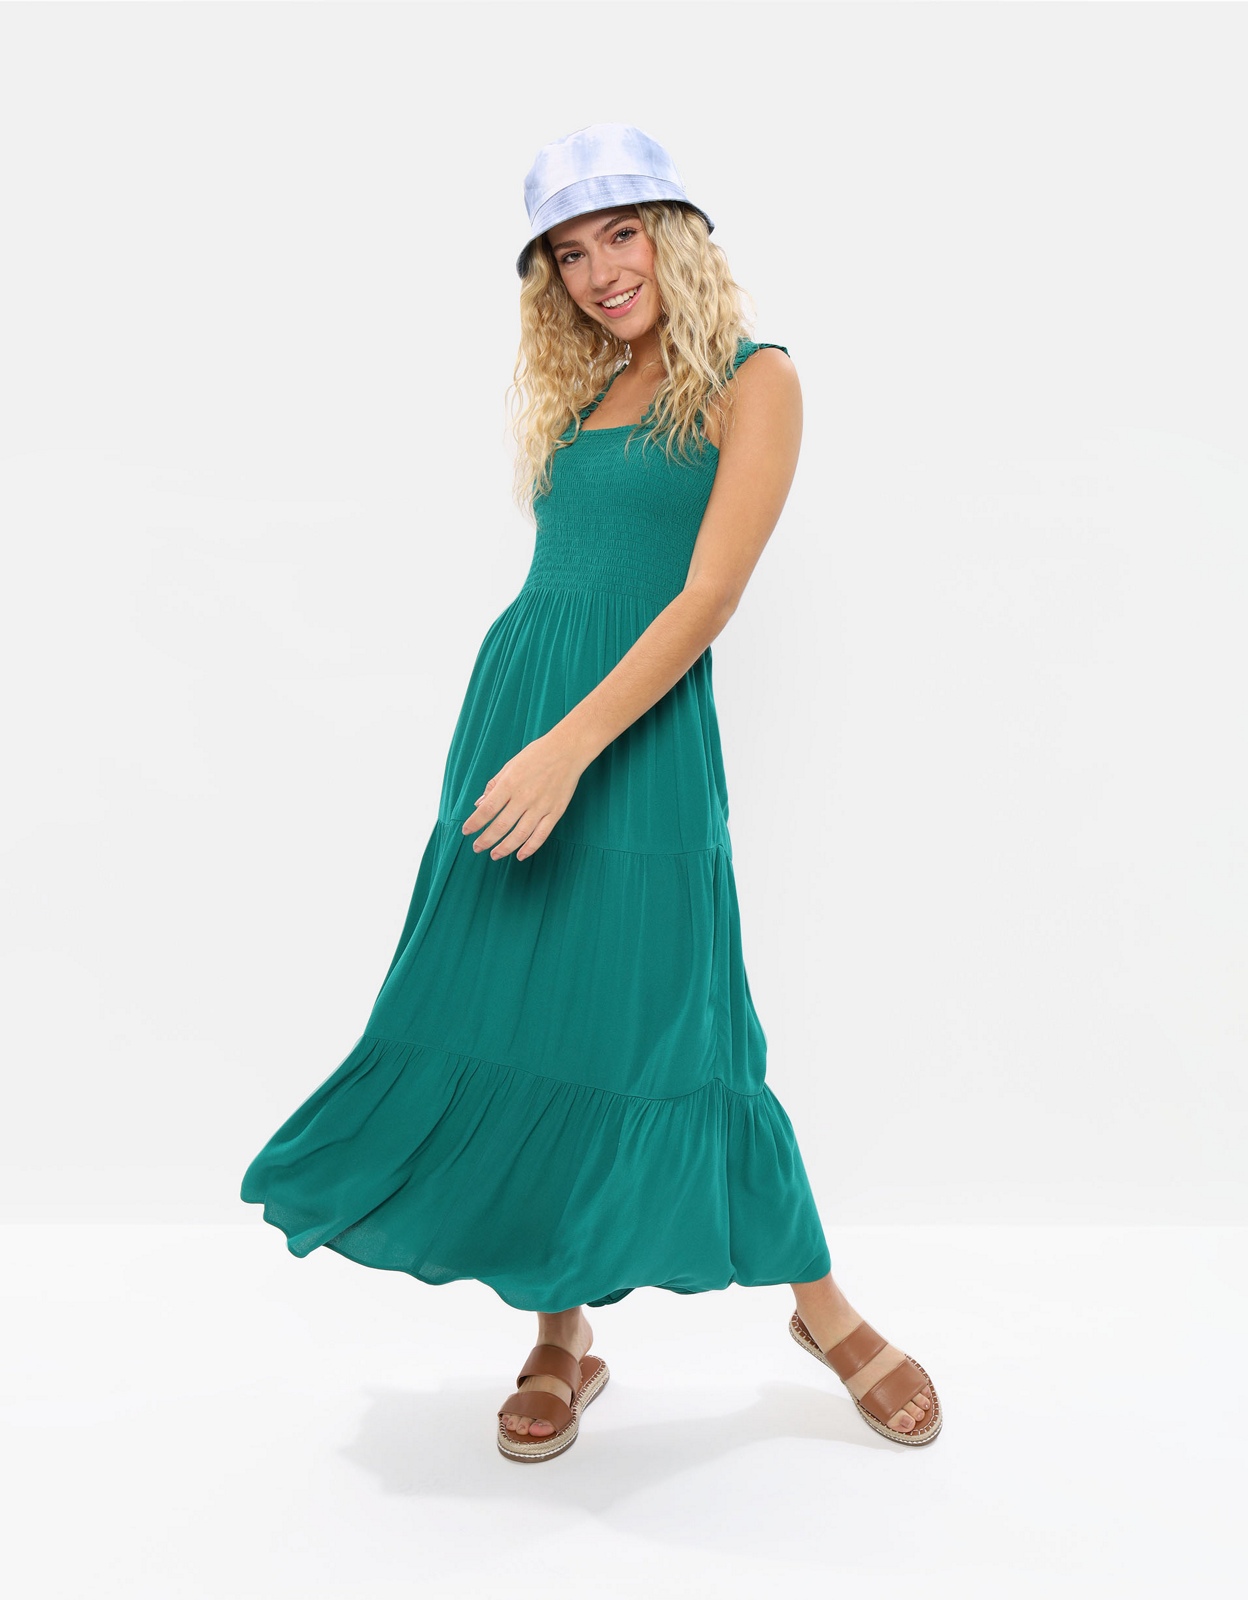 Shop Aerie Smocked Midi Dress online | American Eagle Outfitters Egypt